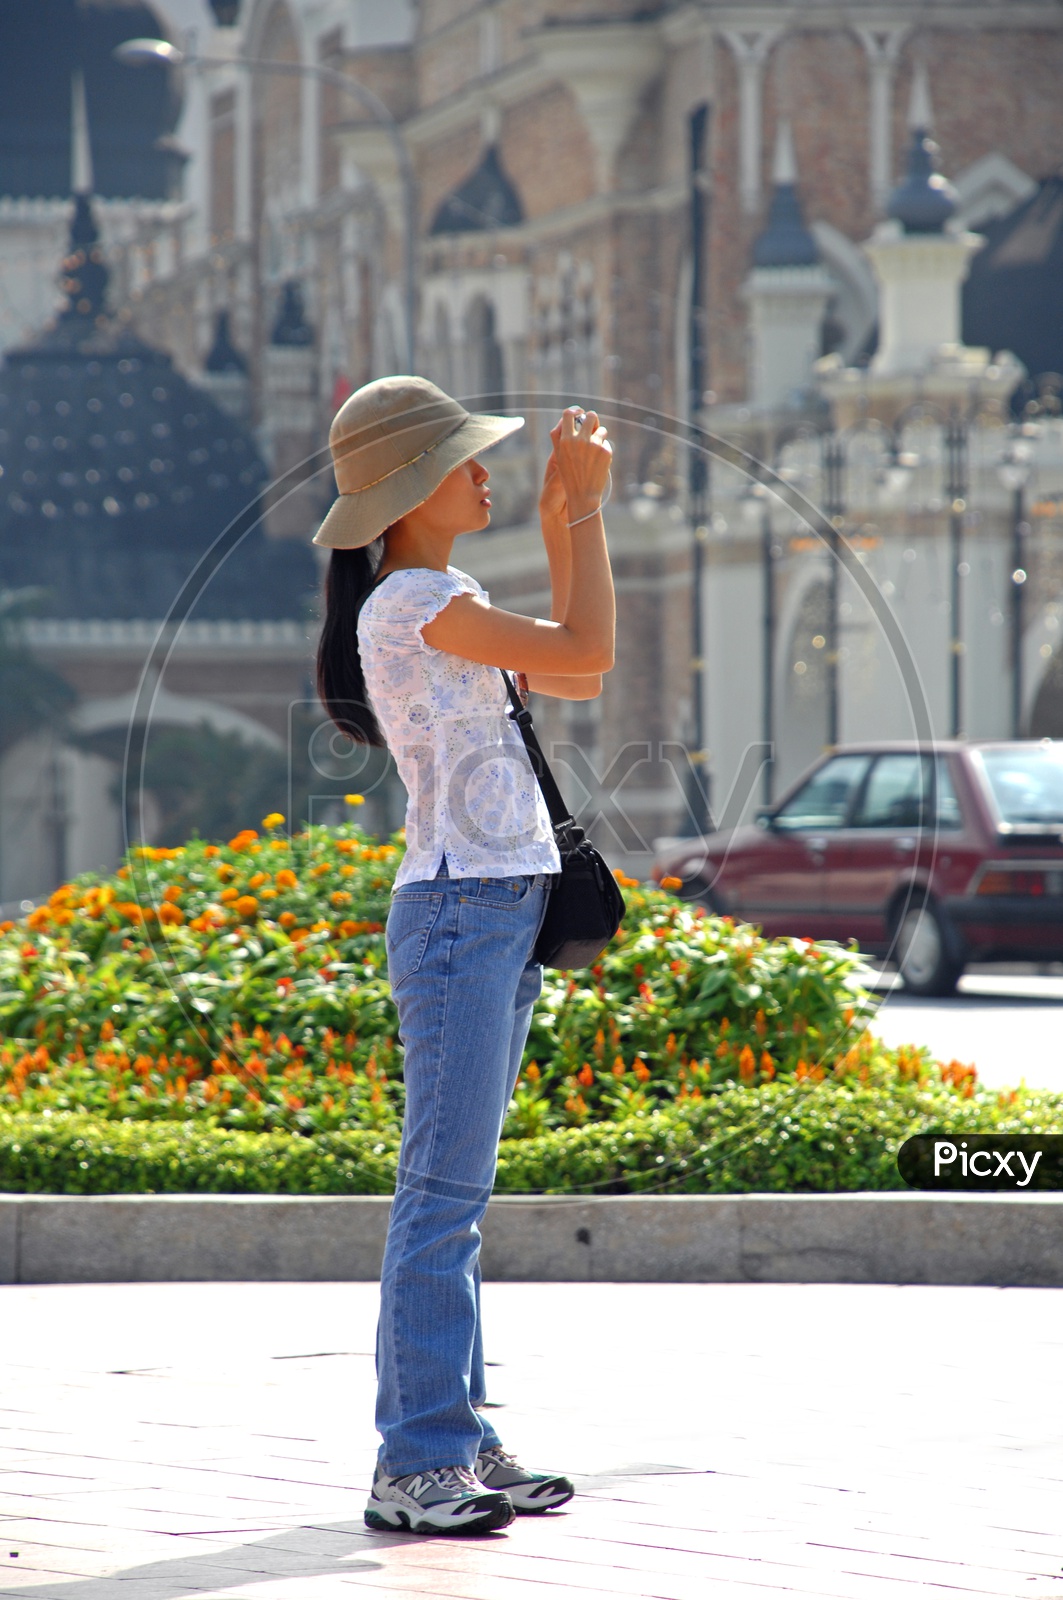 A Woman Taking Pictures